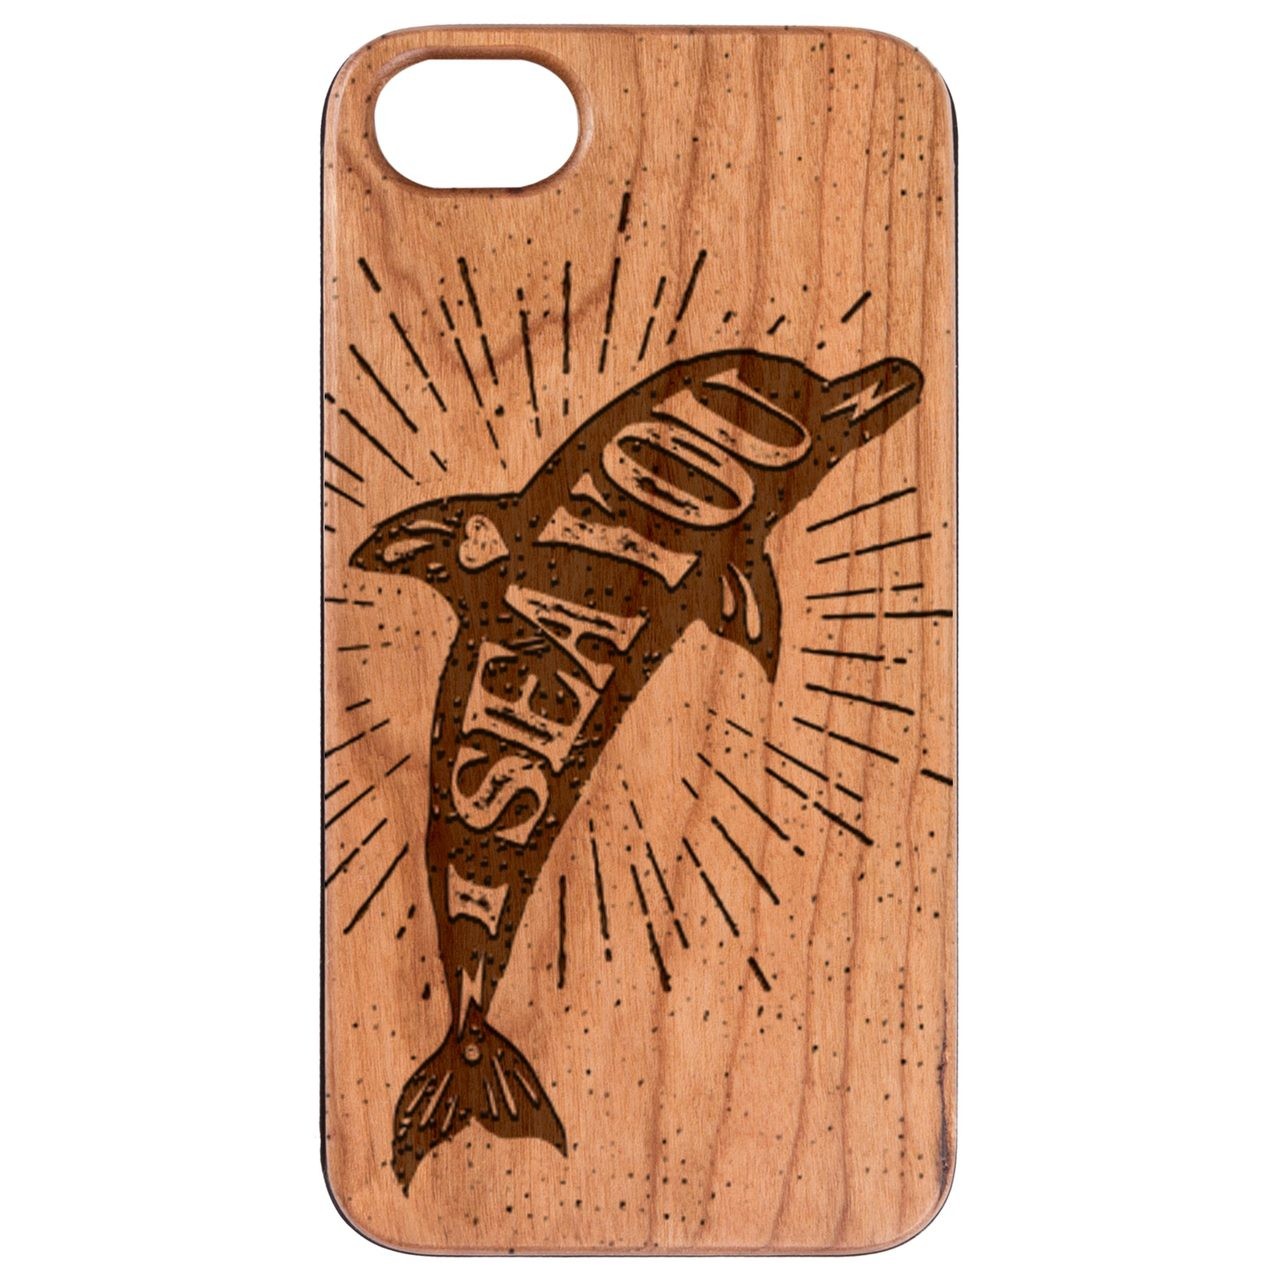  I Sea You - Engraved - Wooden Phone Case - IPhone 13 Models